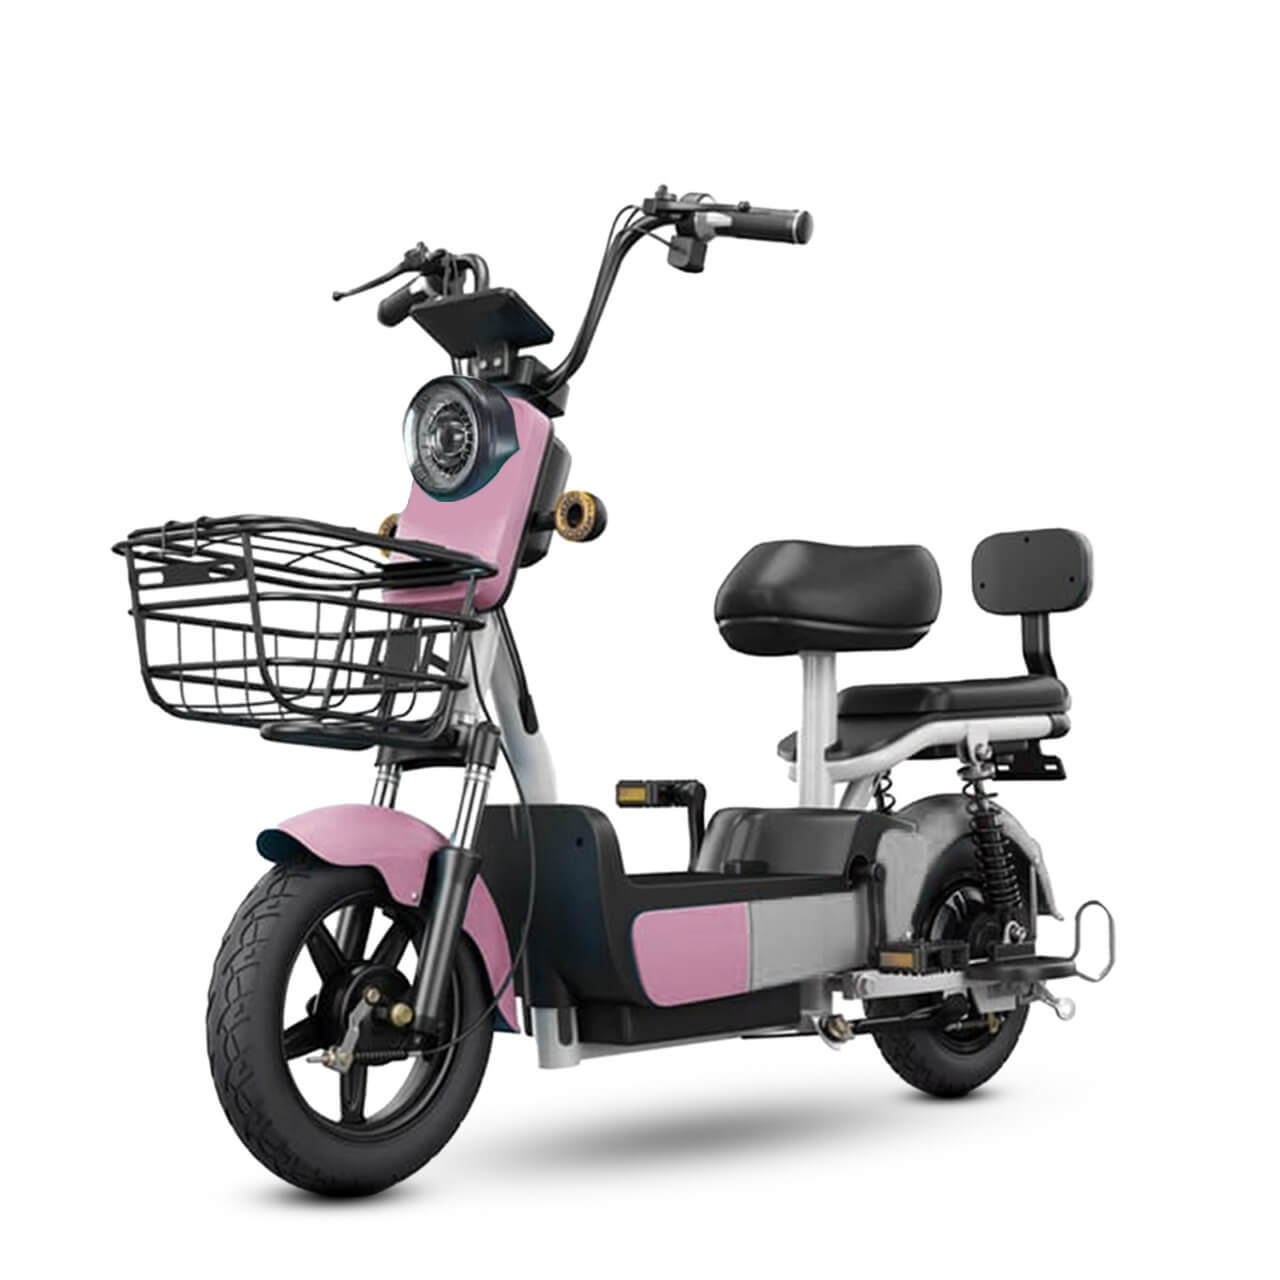 Electric moped 2 seater scooter 48v battery pink  grey